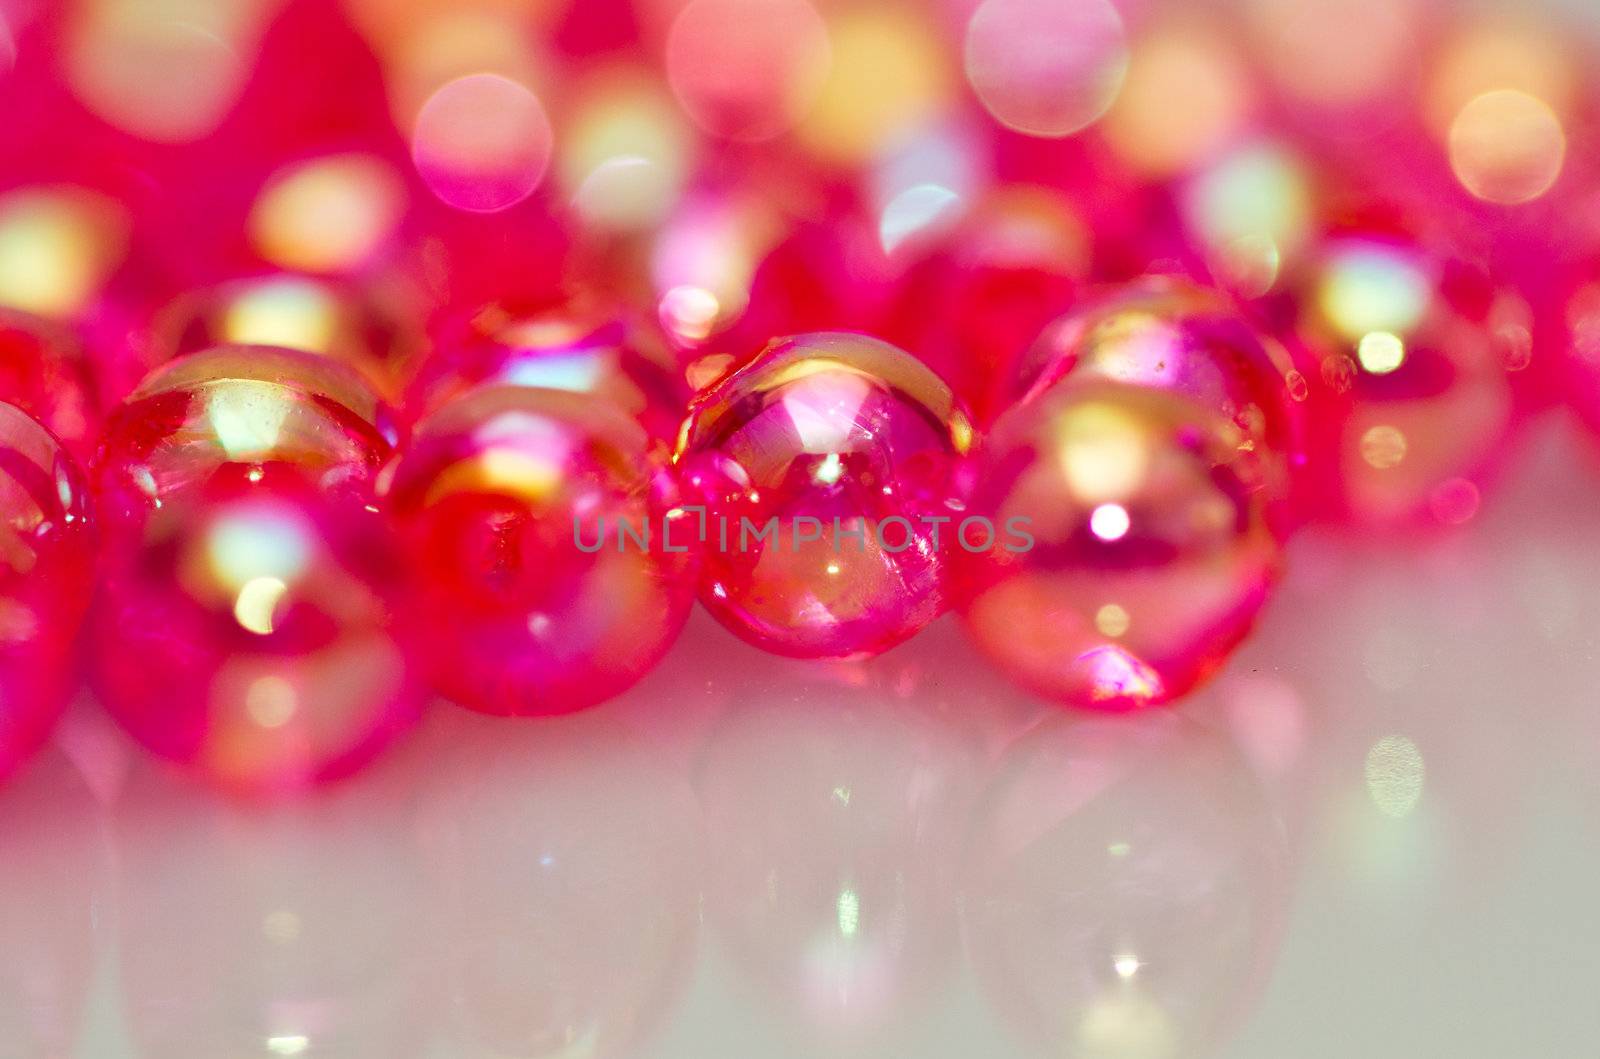 Red beads on white surface with mirror image